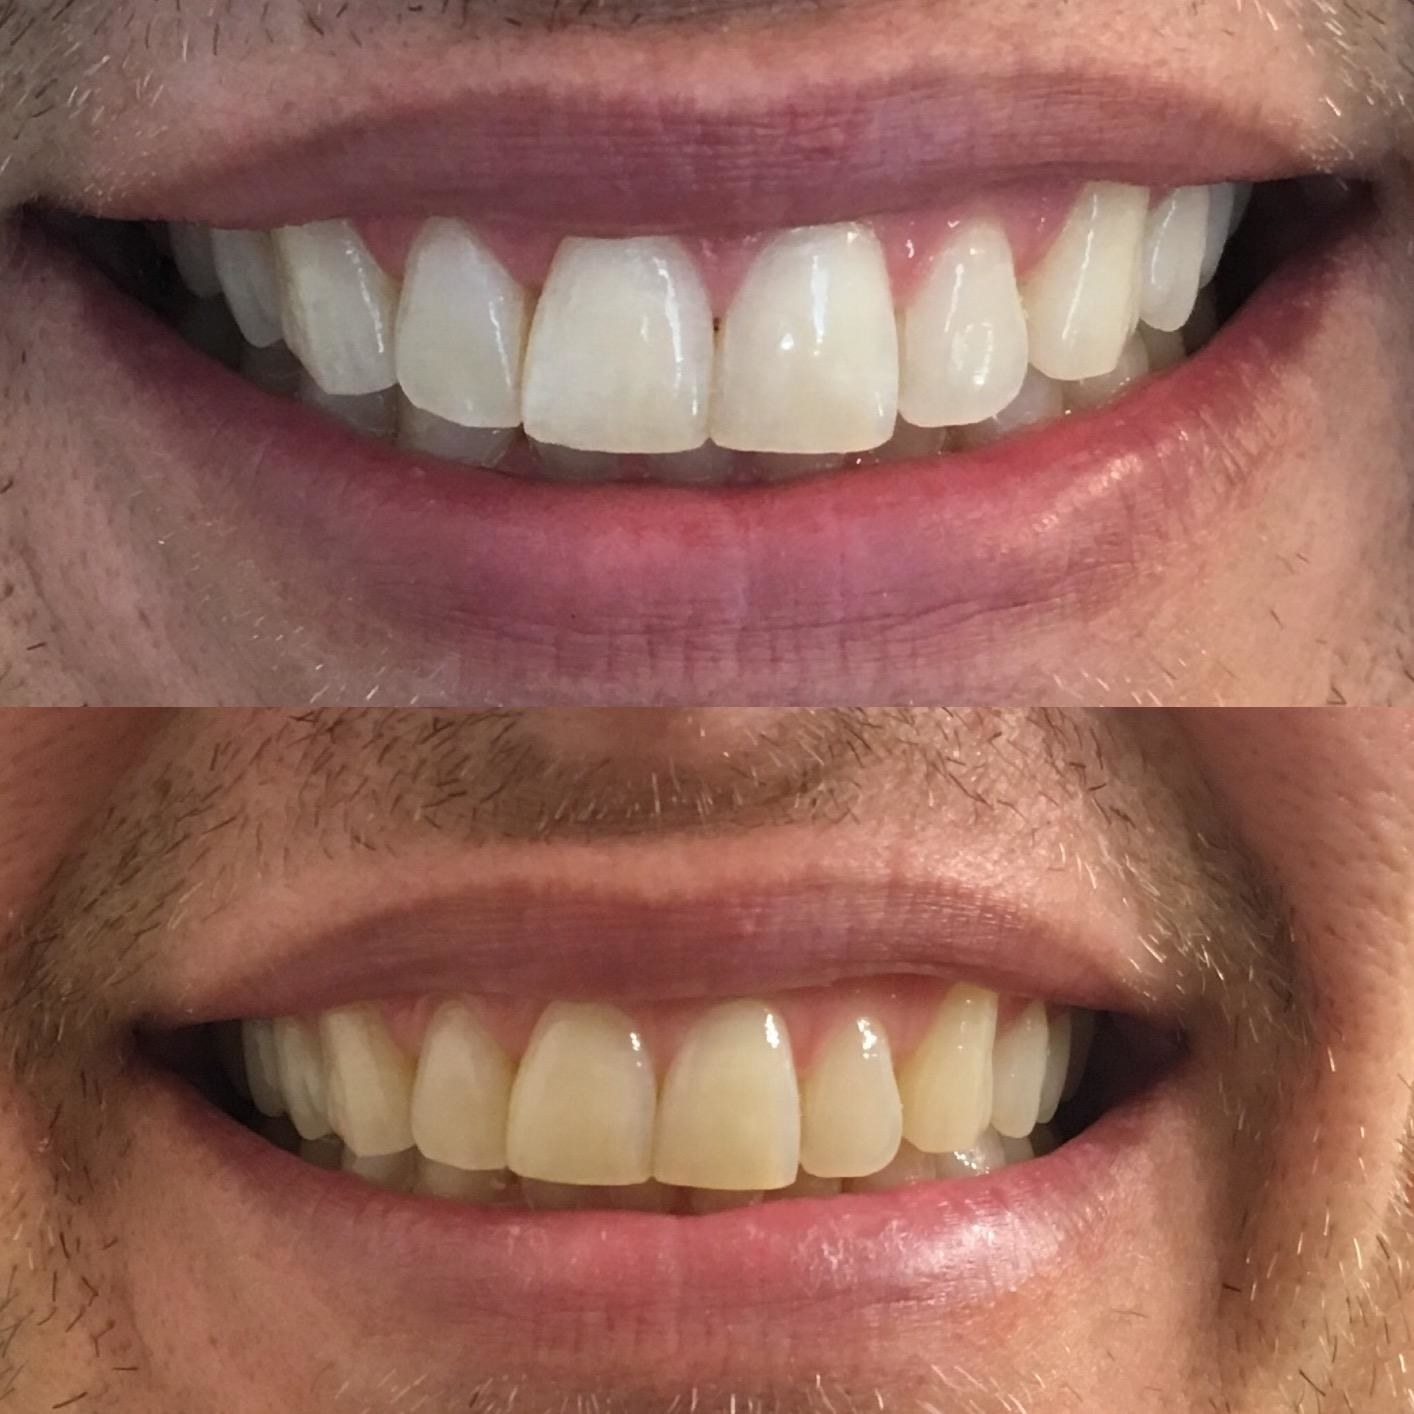 Before and after photo of the reviewer&#x27;s teeth after using the whitening treatment